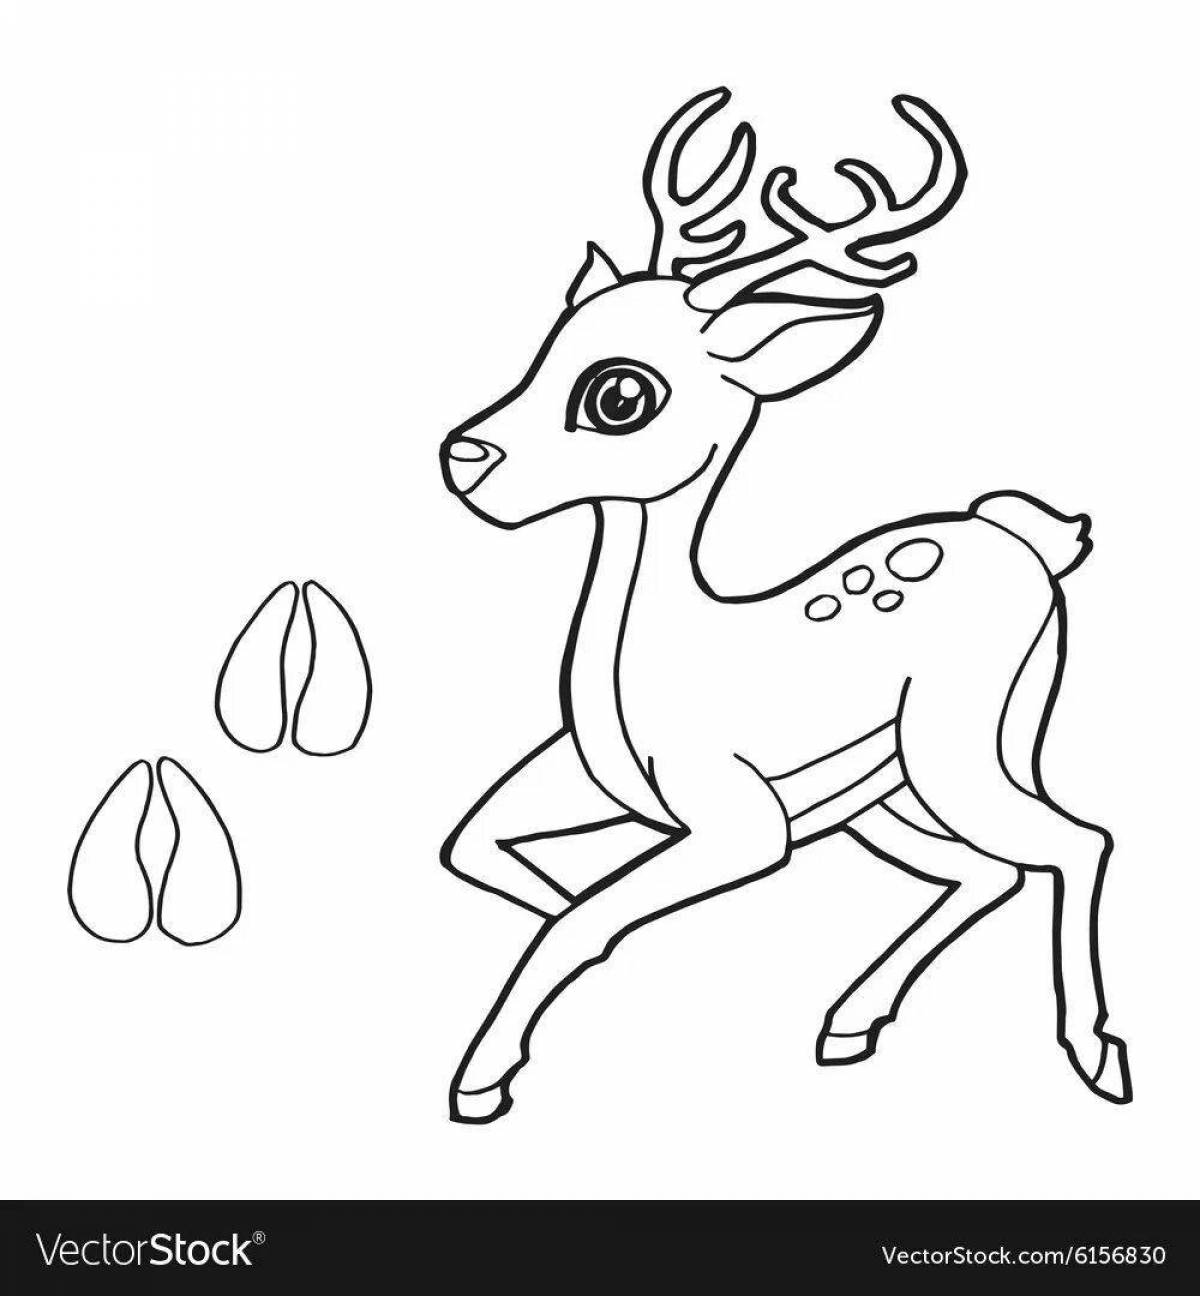 Adorable silver hoof coloring book for kids